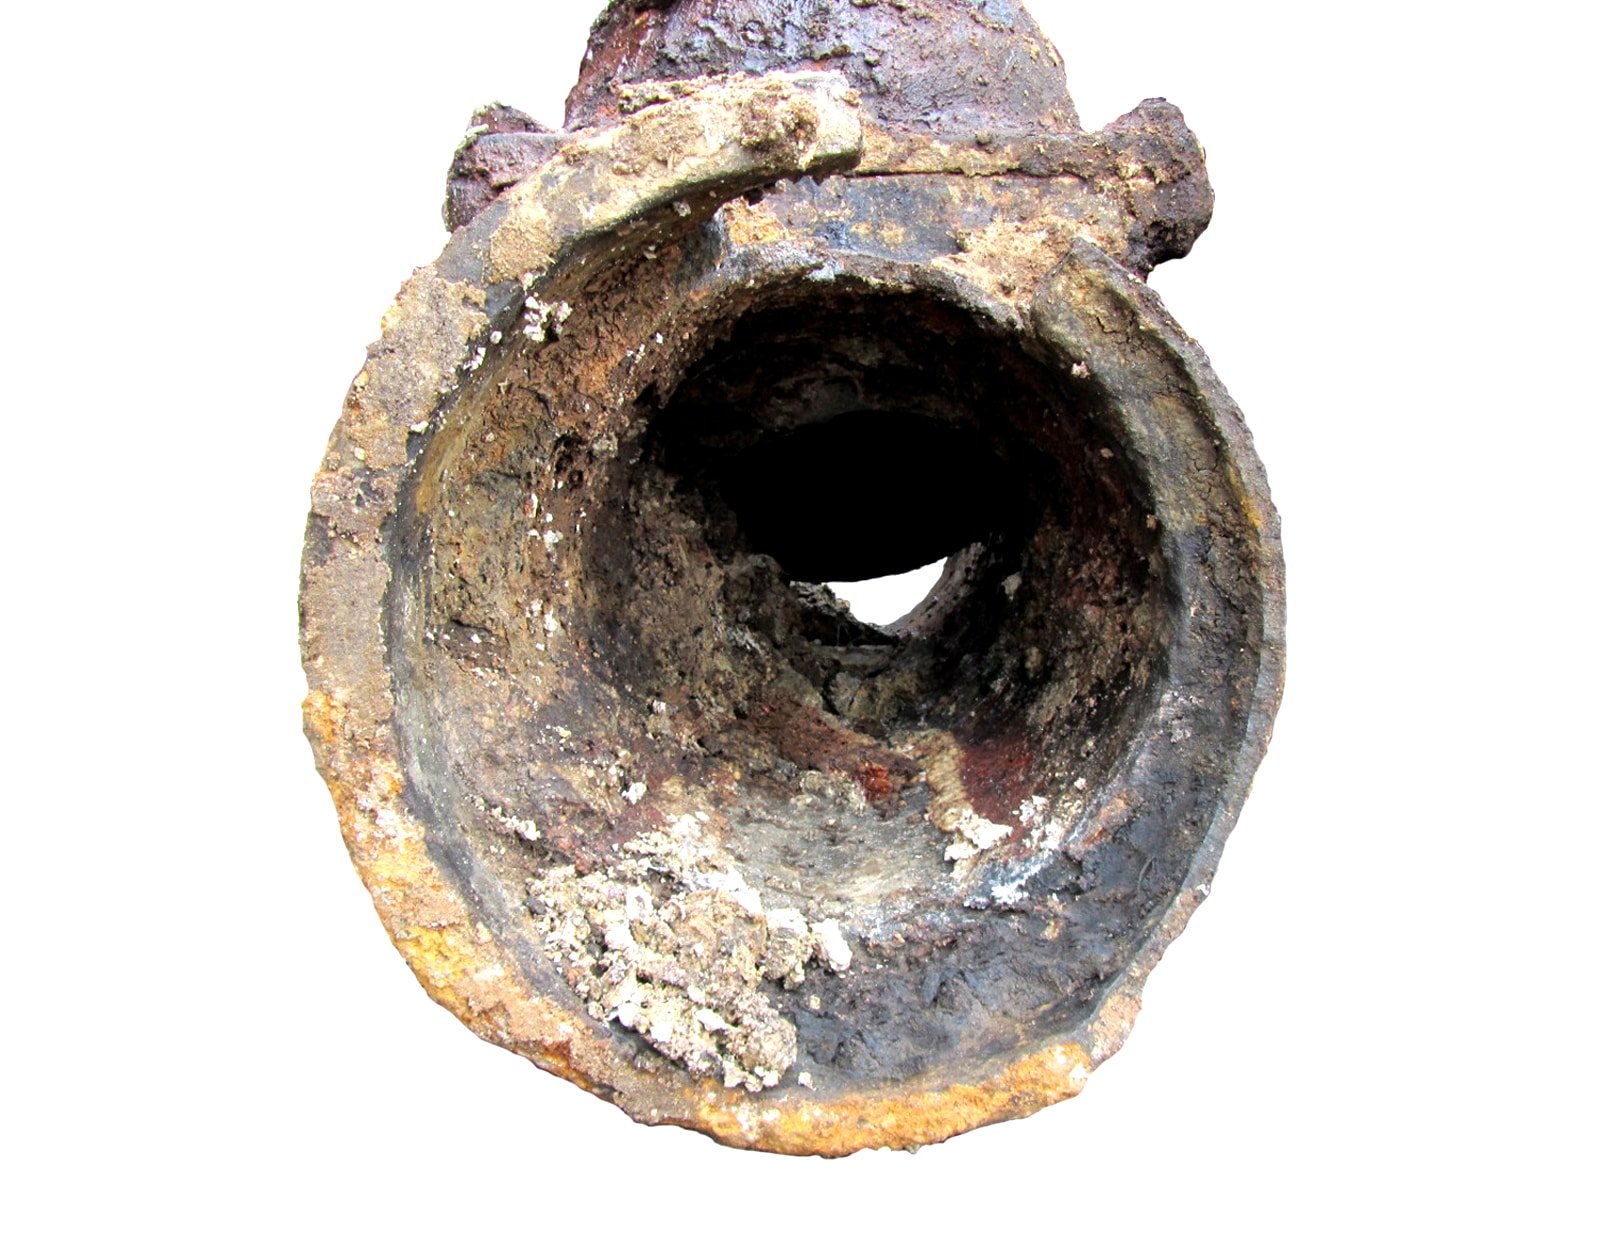 Gate valve repair: the inside of a corroded gate valve